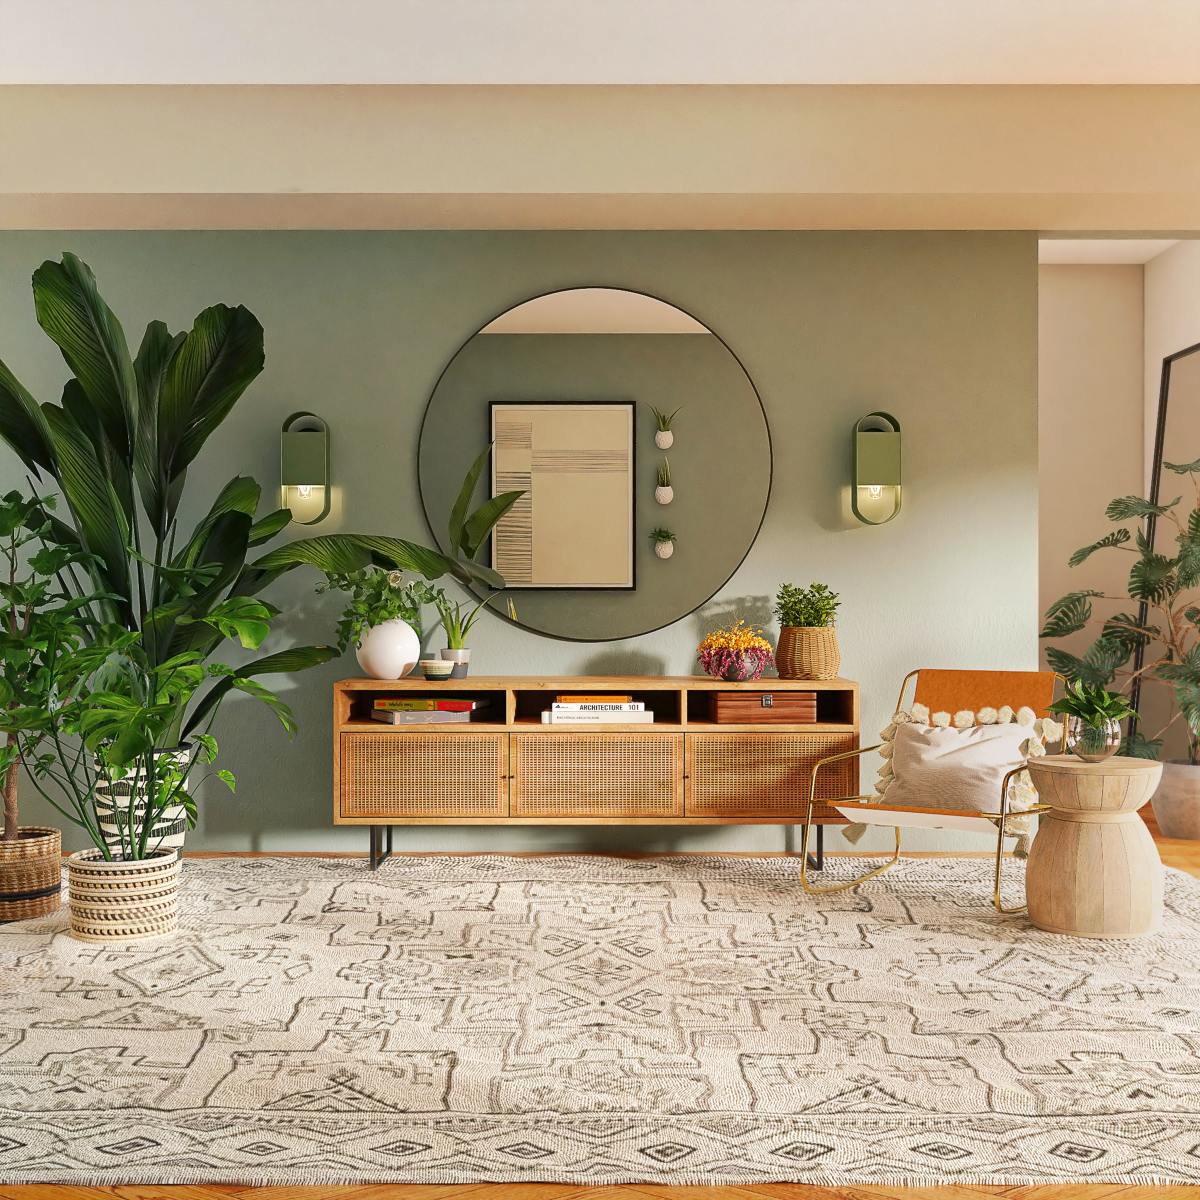 For a Taurus home, I would recommend sticking to a palette of earth tones and spring colors. Adding plants is always a plus. Rounded mirrors go with Taurus' yin energy. You want a clean and organized space.